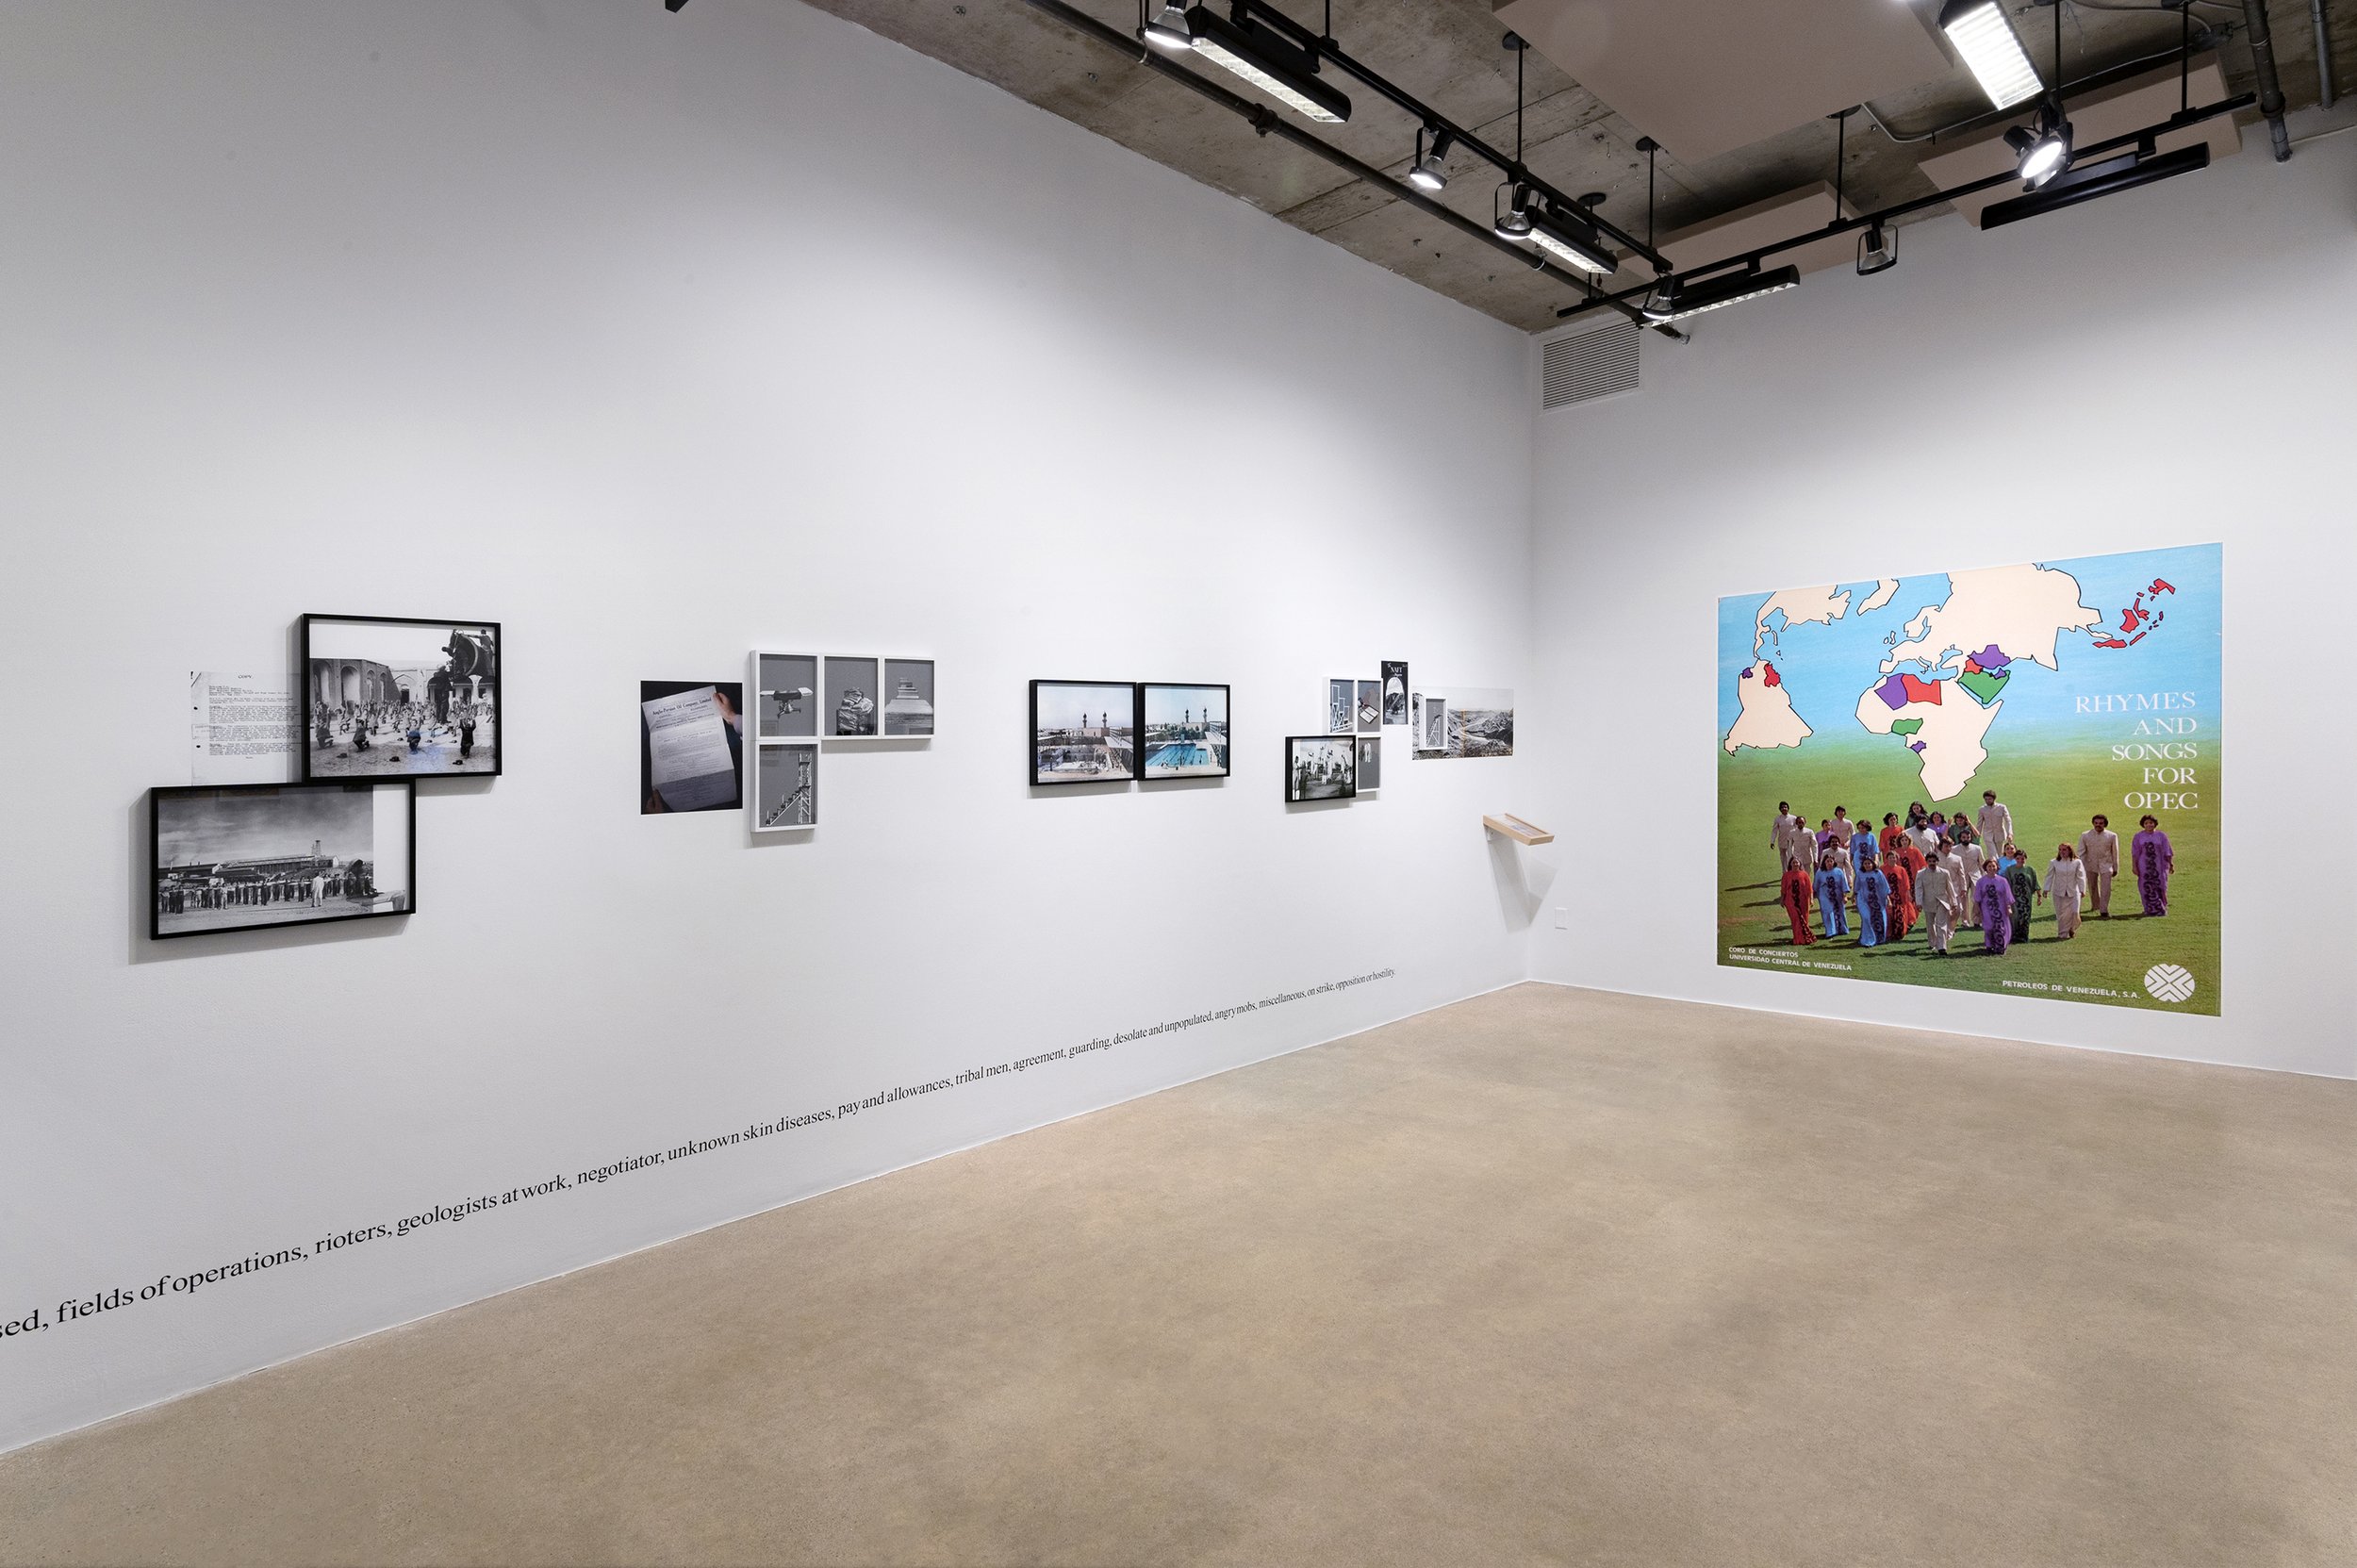 “Specters of the Subterranean (Part I): Rhymes and Songs for the Oil Minister” installed at “Hiding in PLain Sight: Archives of Oil,” Centre Clark, Montréal. Photo: Paul Litherland.